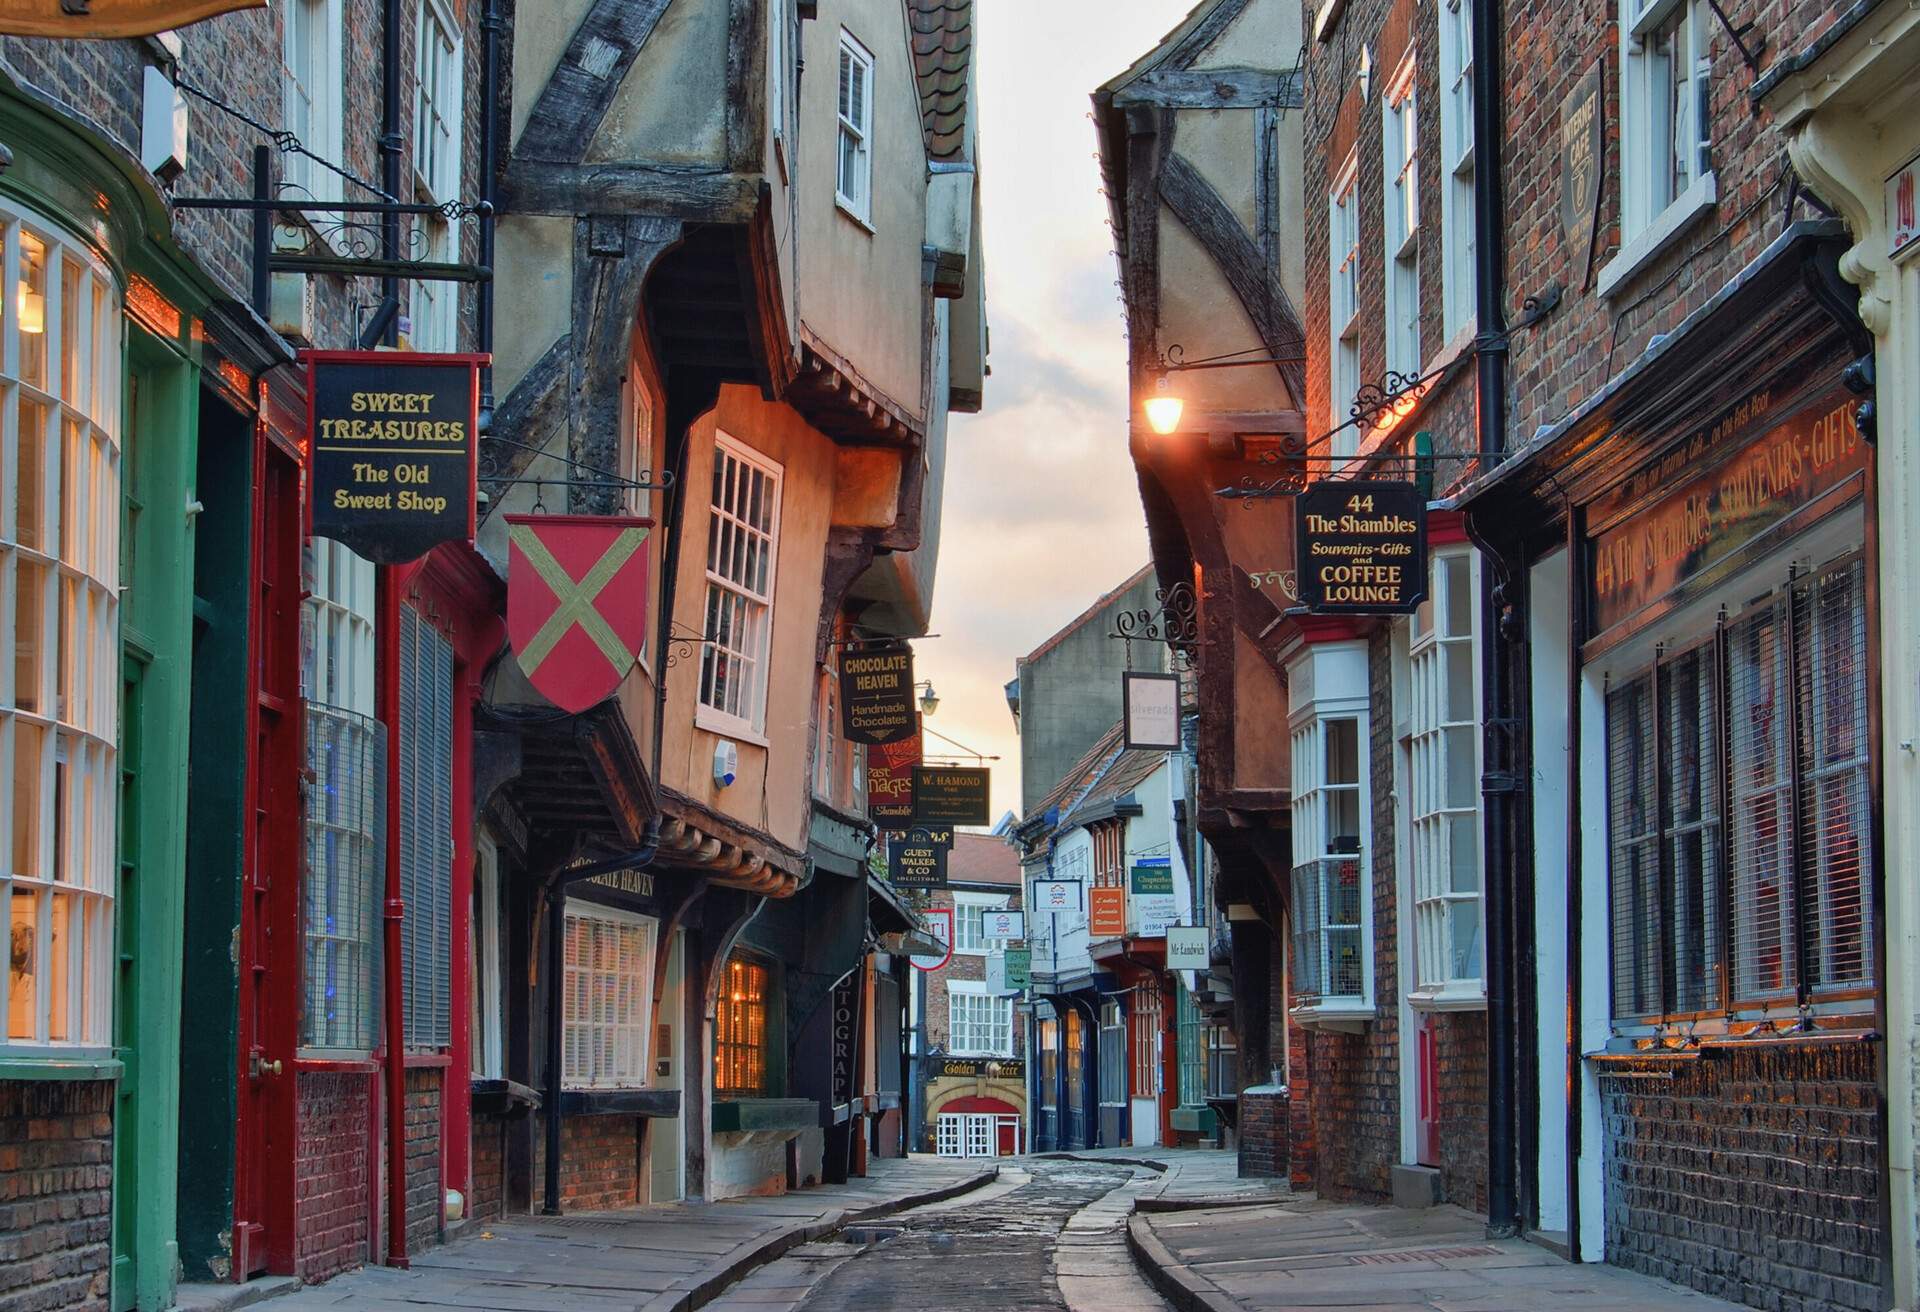 Recently voted as the most picturesque street in Britain, 'The Shambles' is a centre piece of historic York.